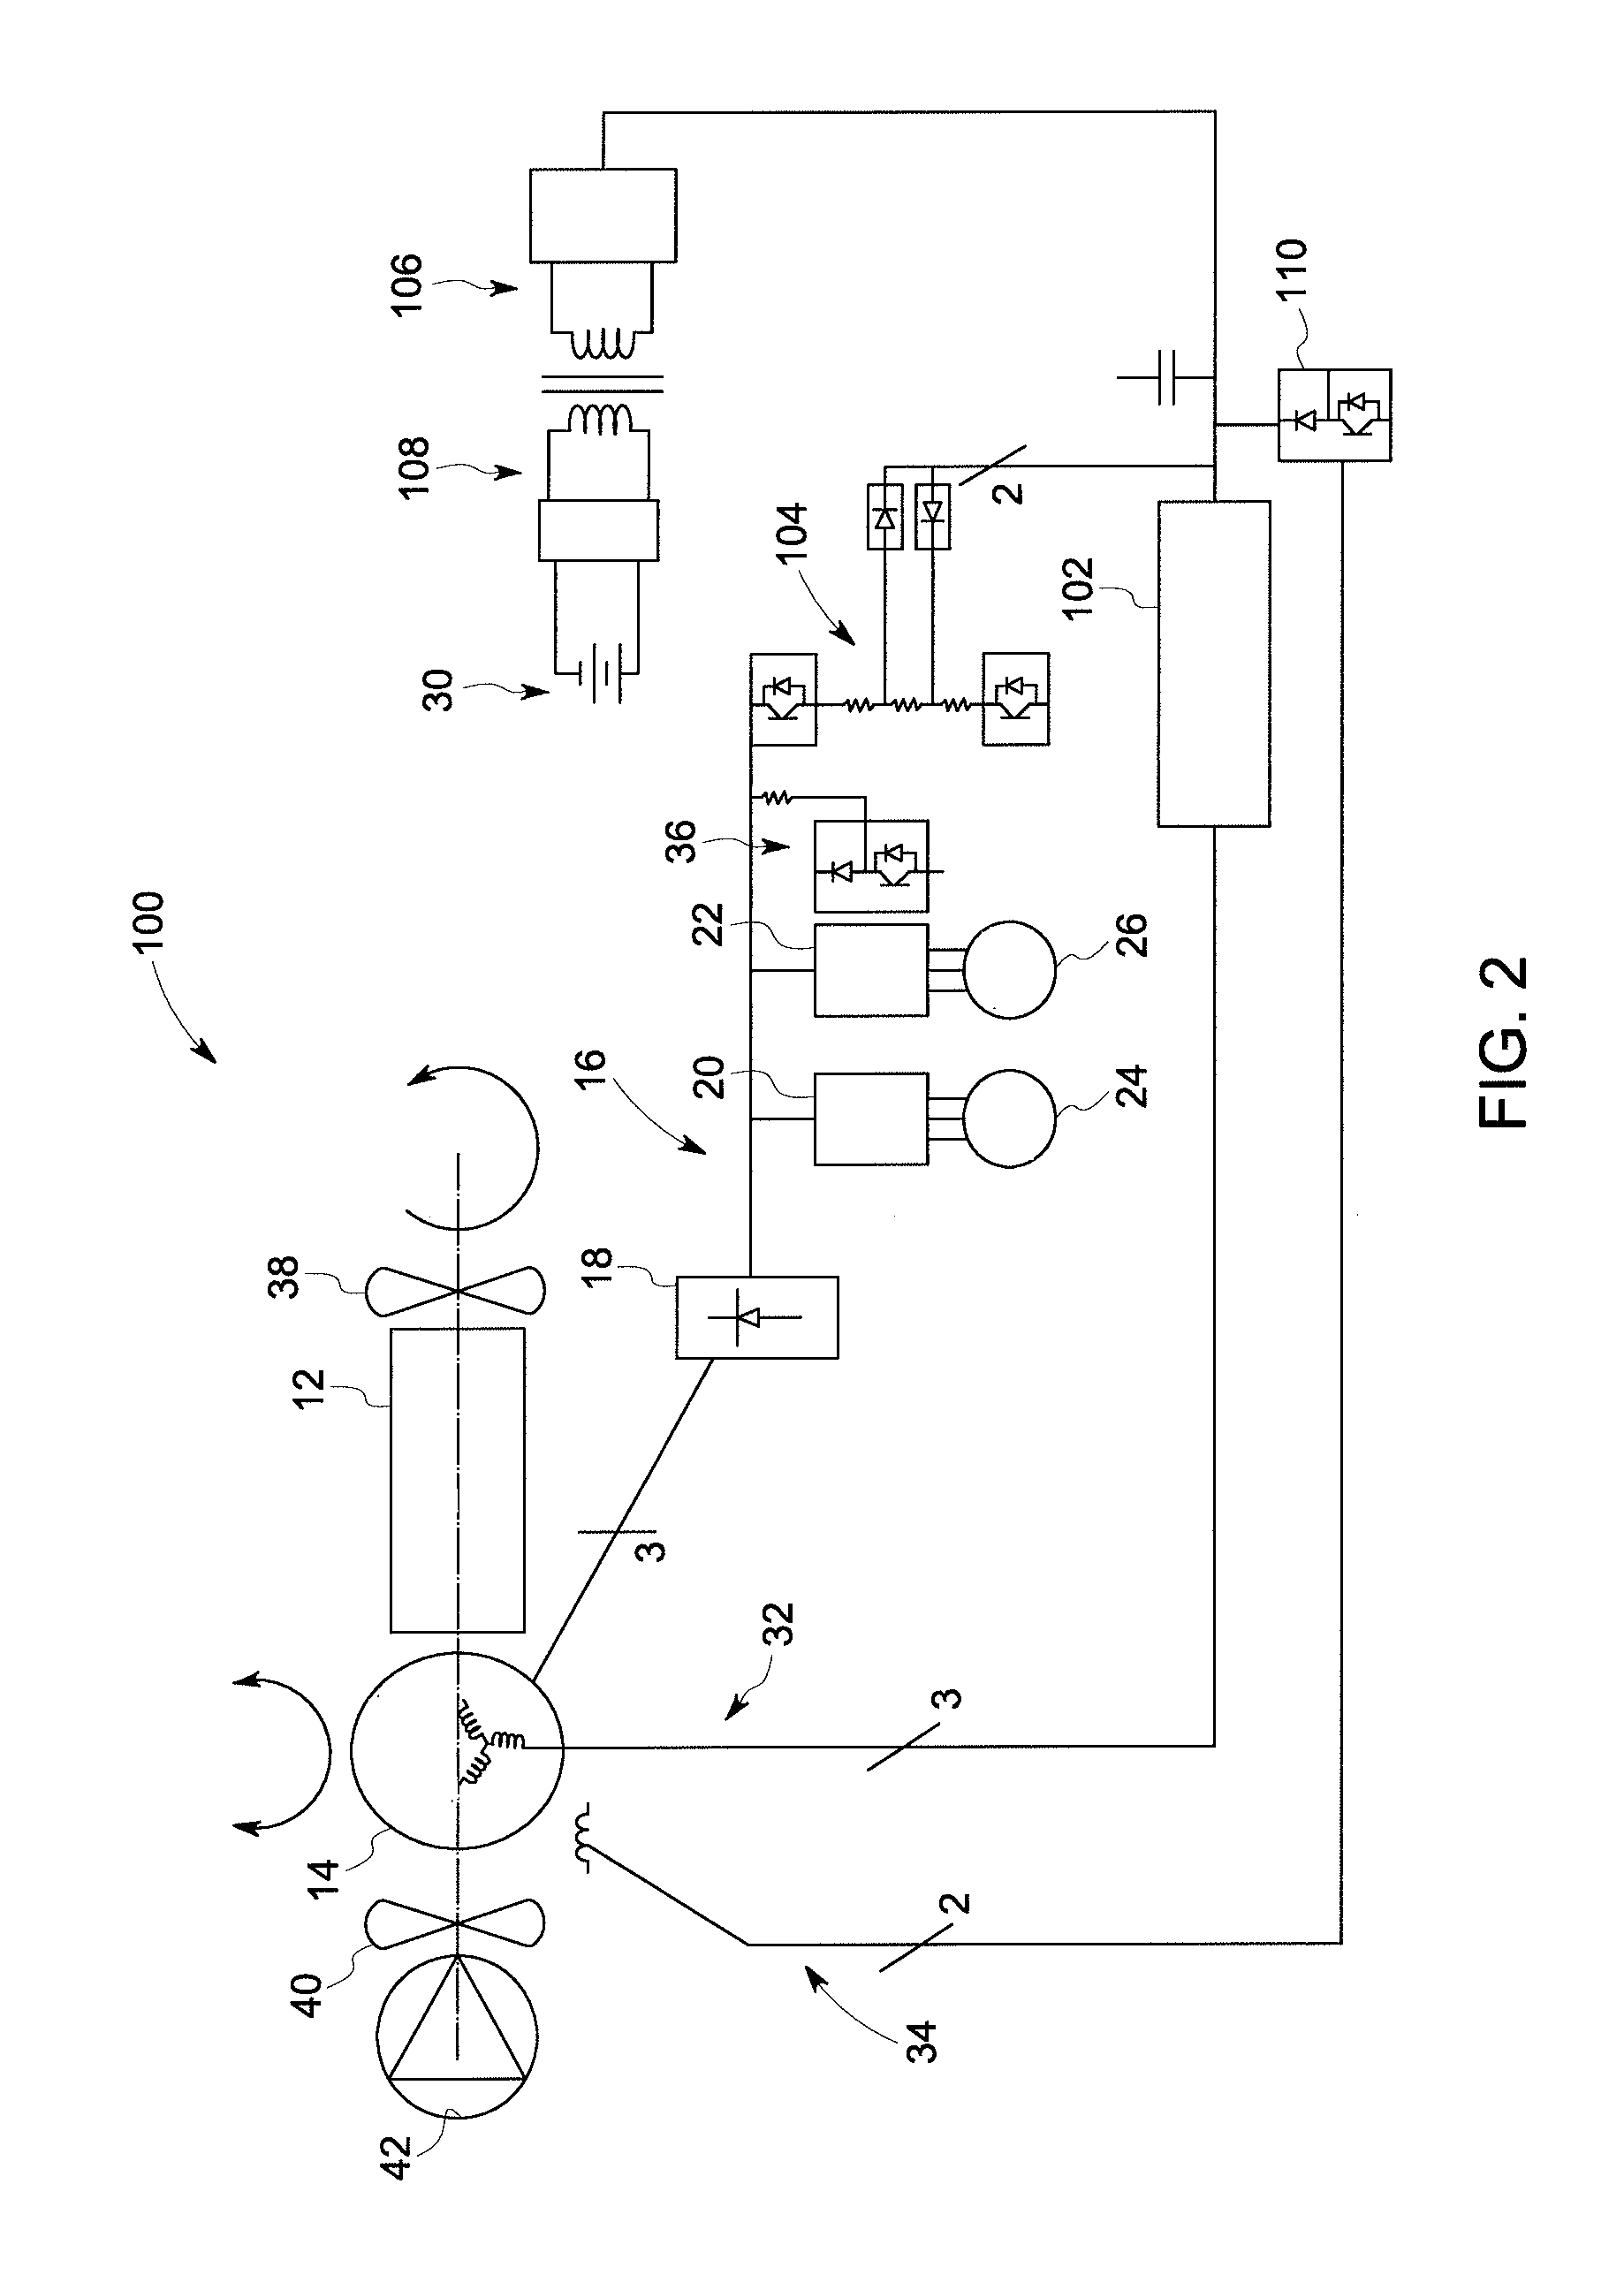 System and method for reducing fuel consumption in a vehicle